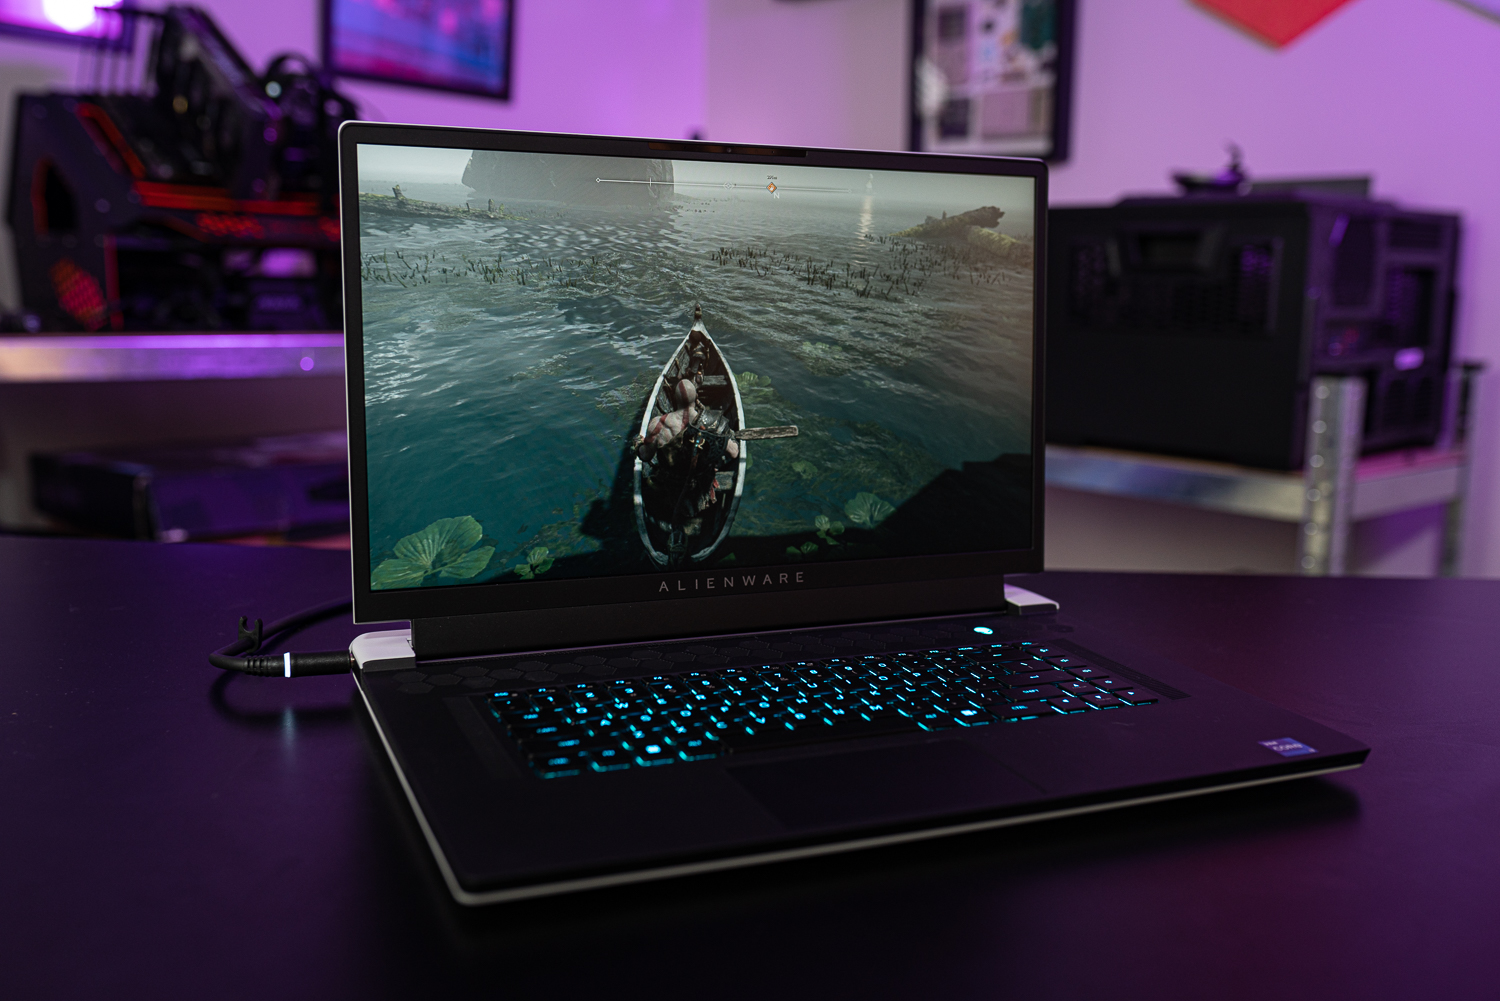 Alienware M15 R3 review: a thin gaming laptop with some